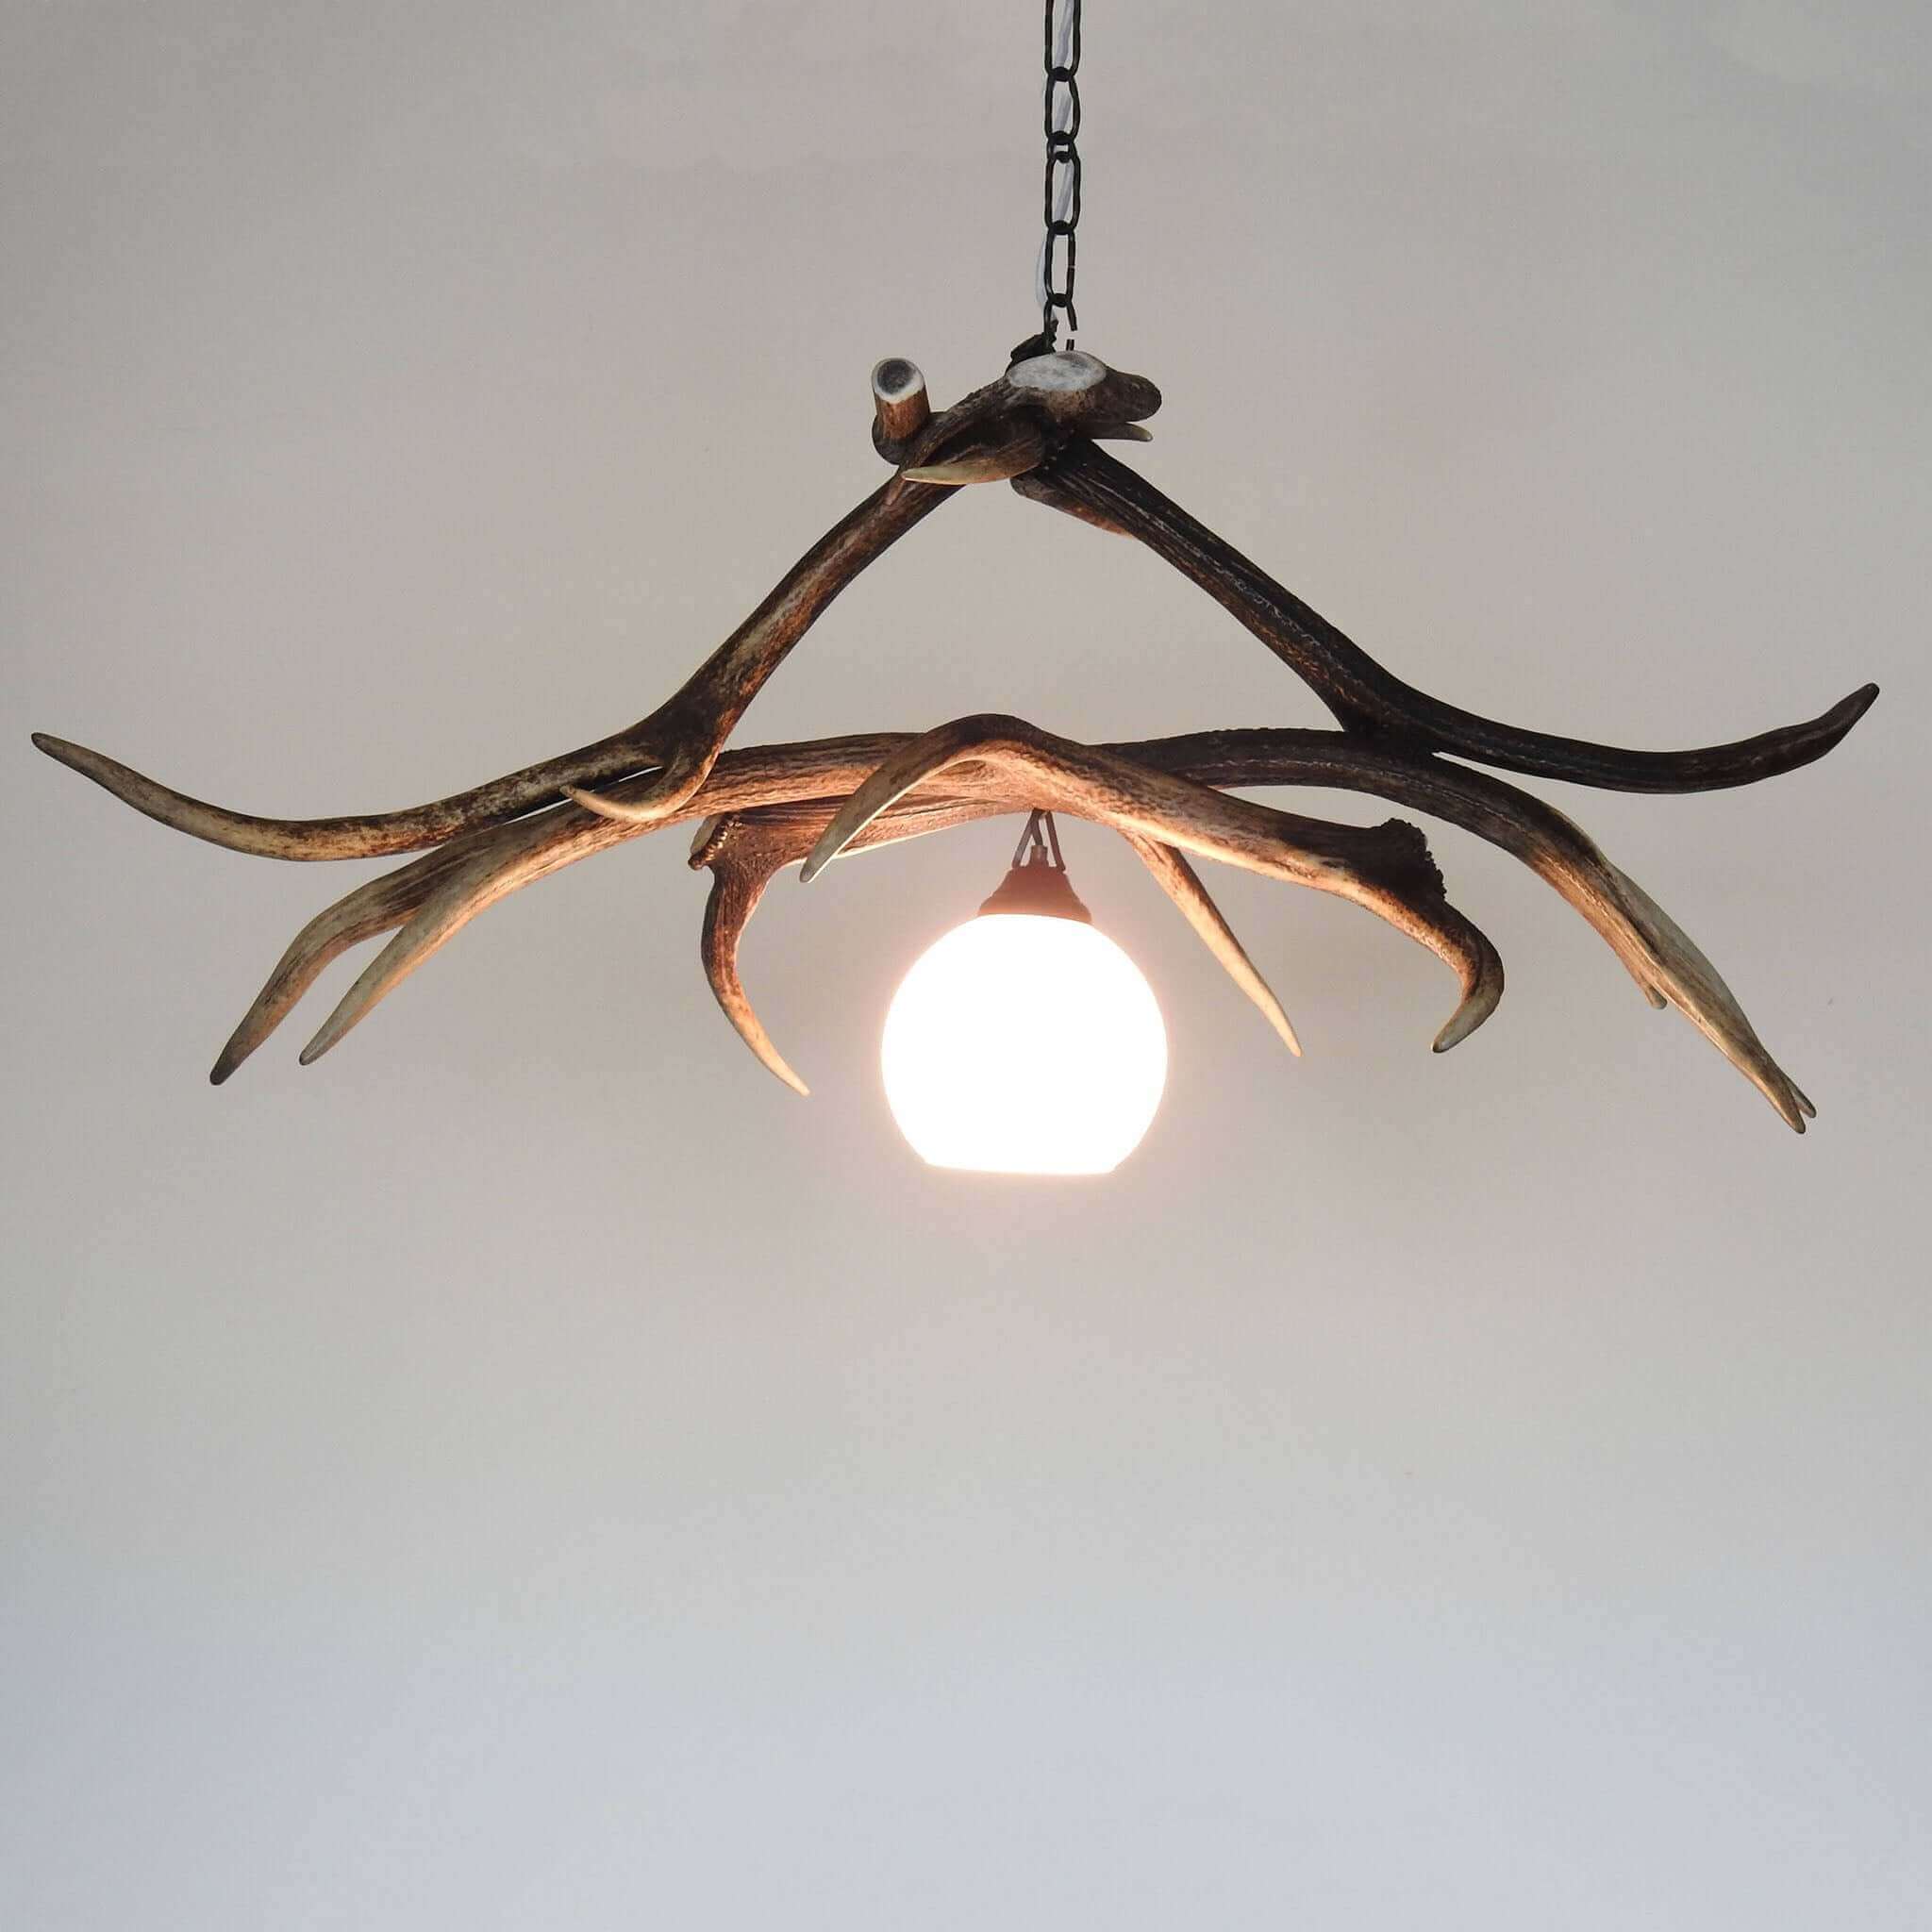 Real antler light fixture for table.